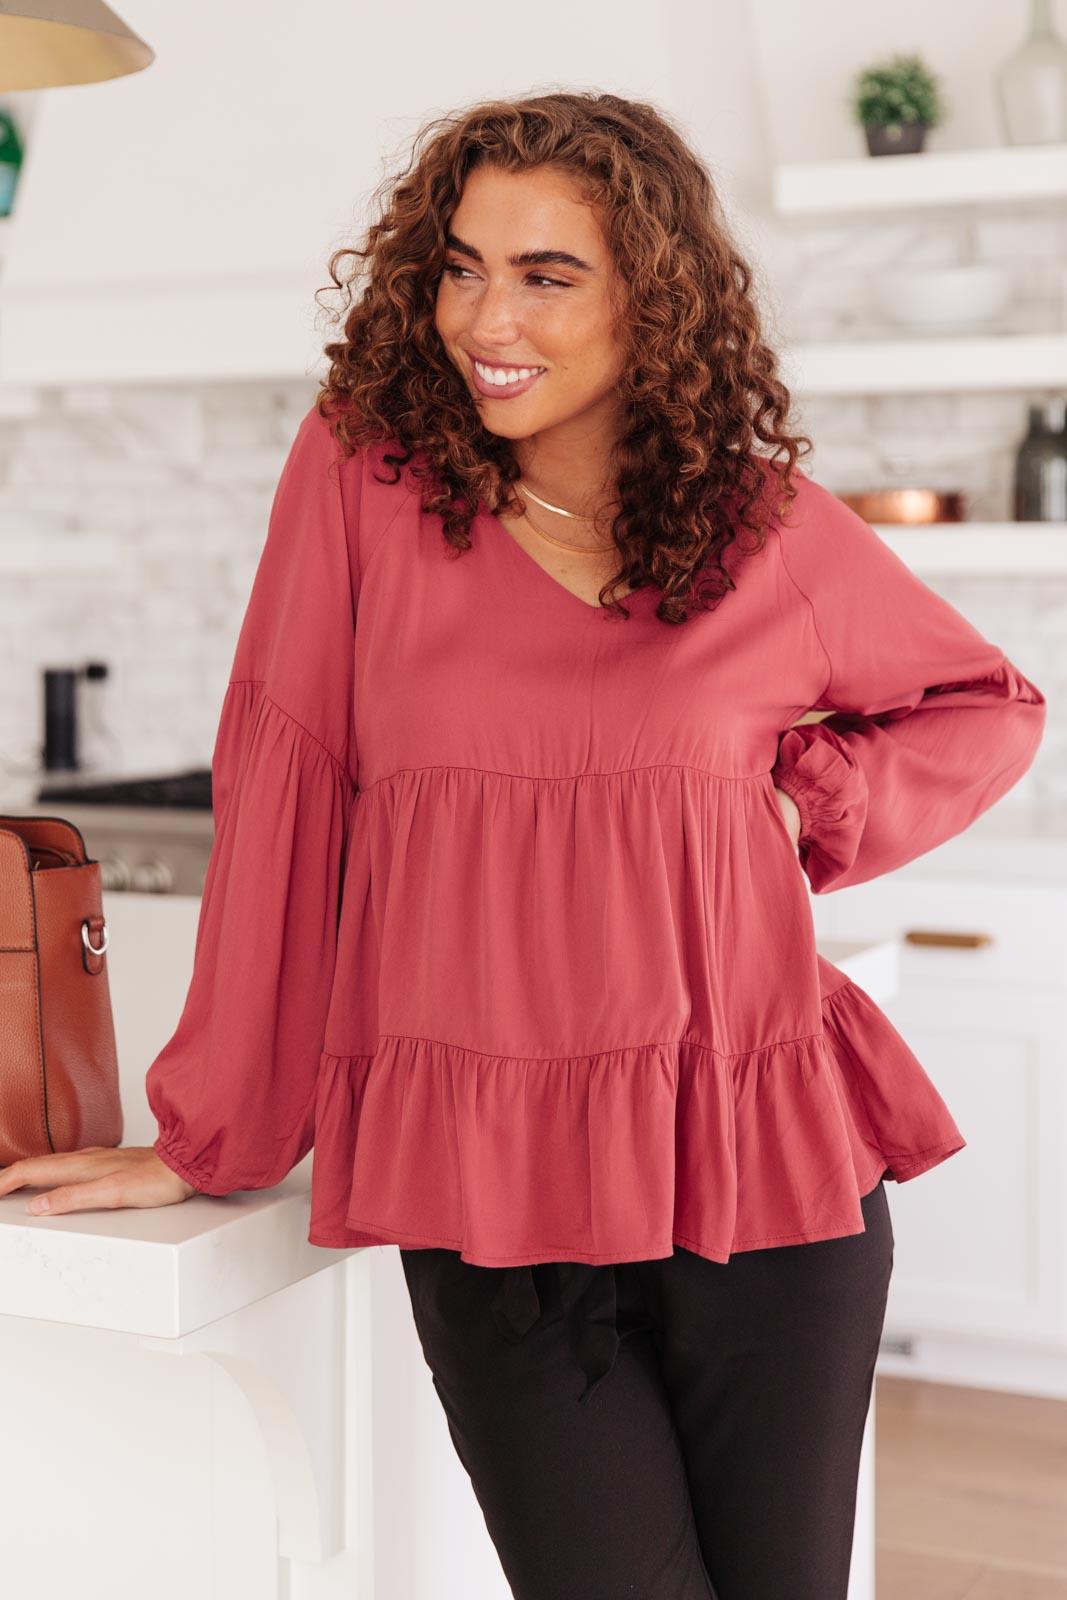 Sassy Swing Tiered Top Womens Ave Shops   